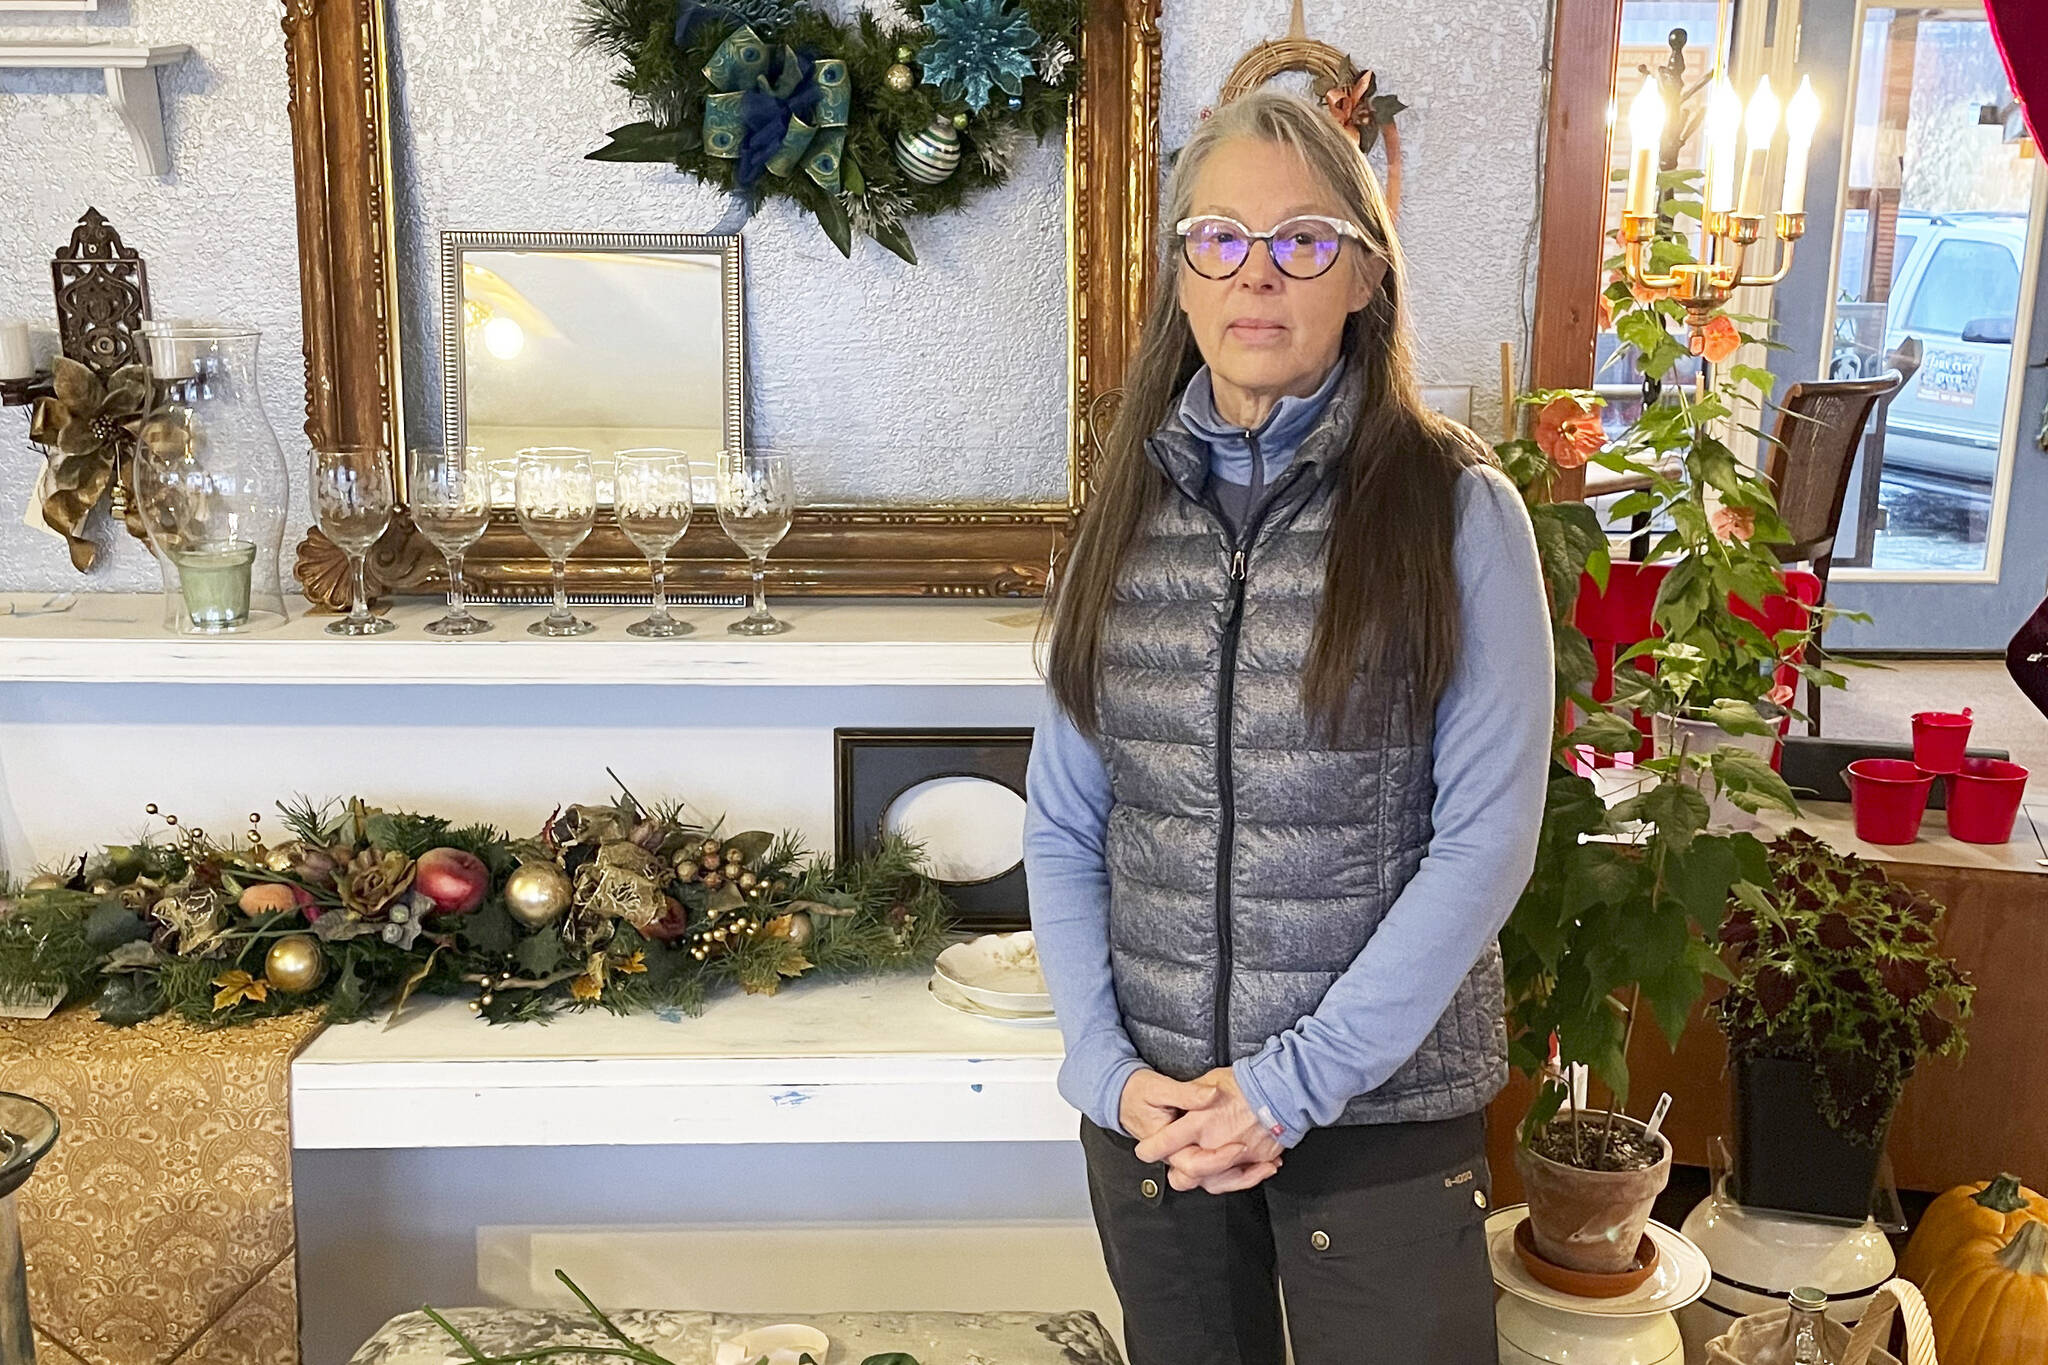 Martine Cyriacks Sorensen poses in her store, Faux Ever Green, on Monday, Dec. 5, 2022, on East End Road in Homer, Alaska. (Photo by Emilie Springer/Homer News)